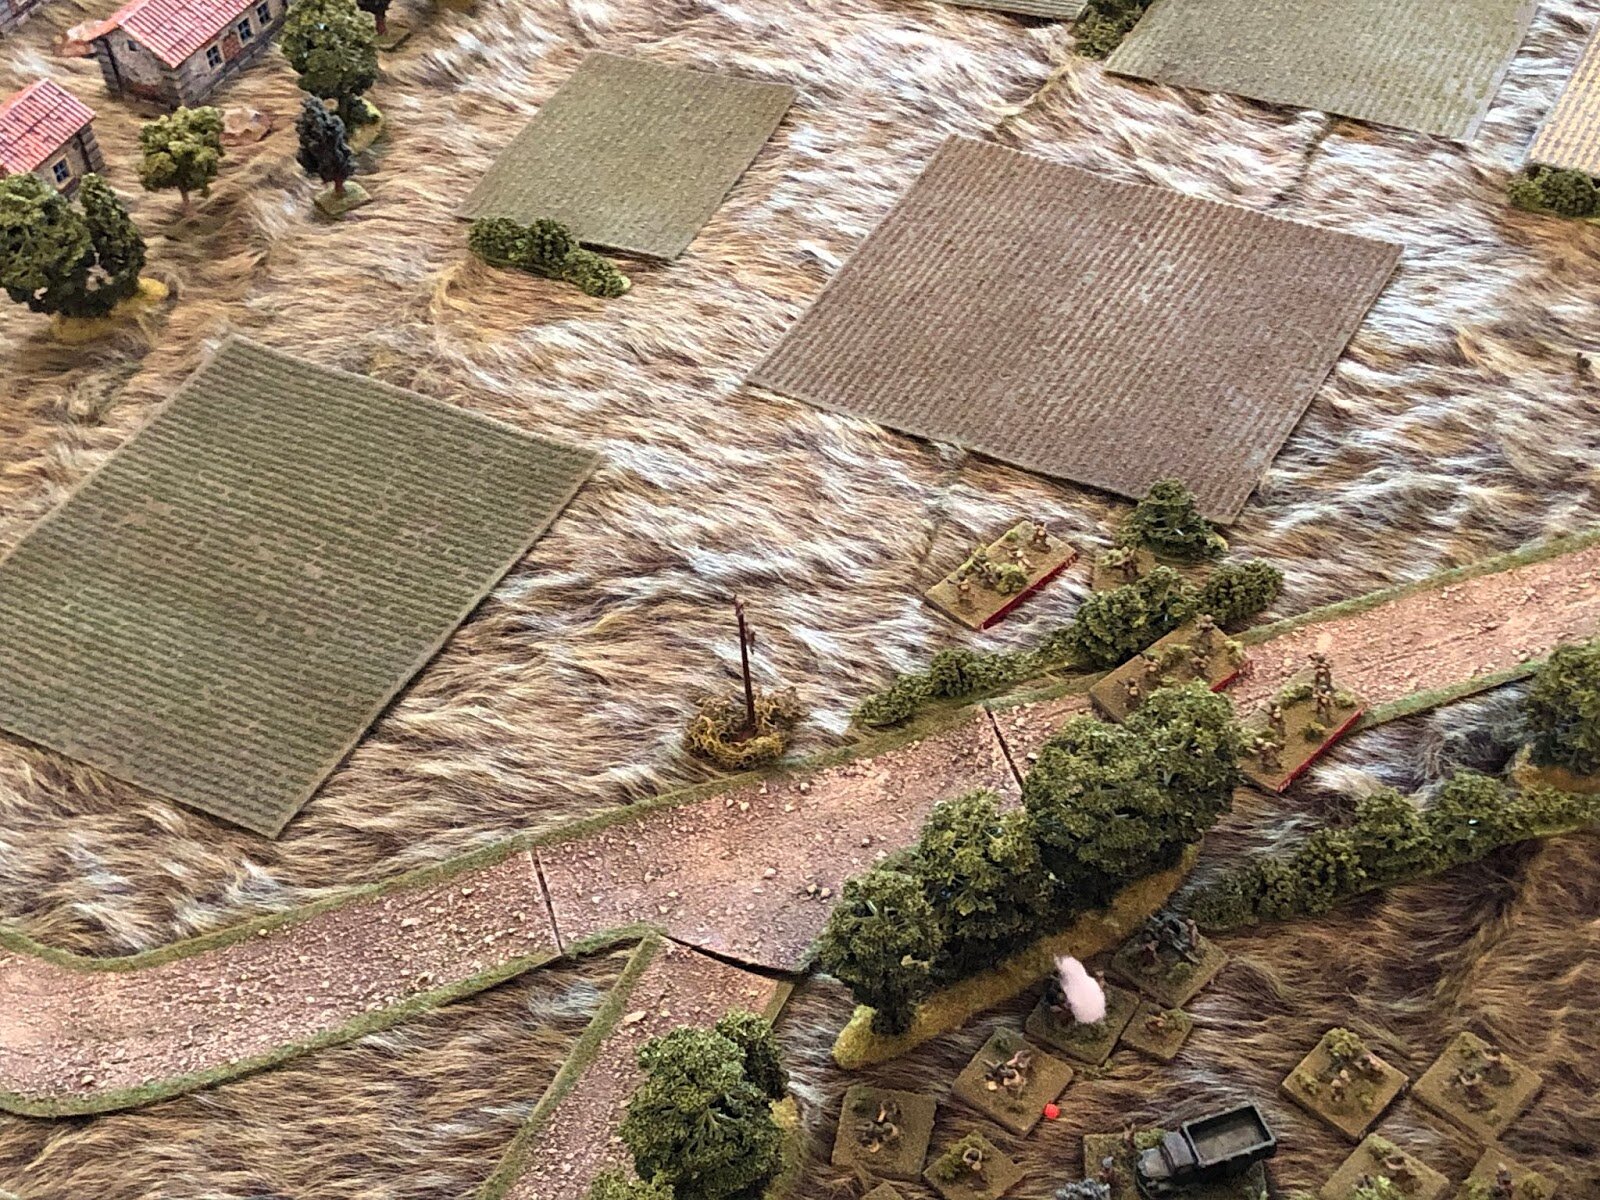  While in the center, the Soviet 3rd Platoon steps off (center) for Snava (top left), as the Soviet CO rallies the MG Platoon (bottom center).   And then Turn 1 ends. Kinda wild that, with all that Soviet armor on the table, the only one that moved w